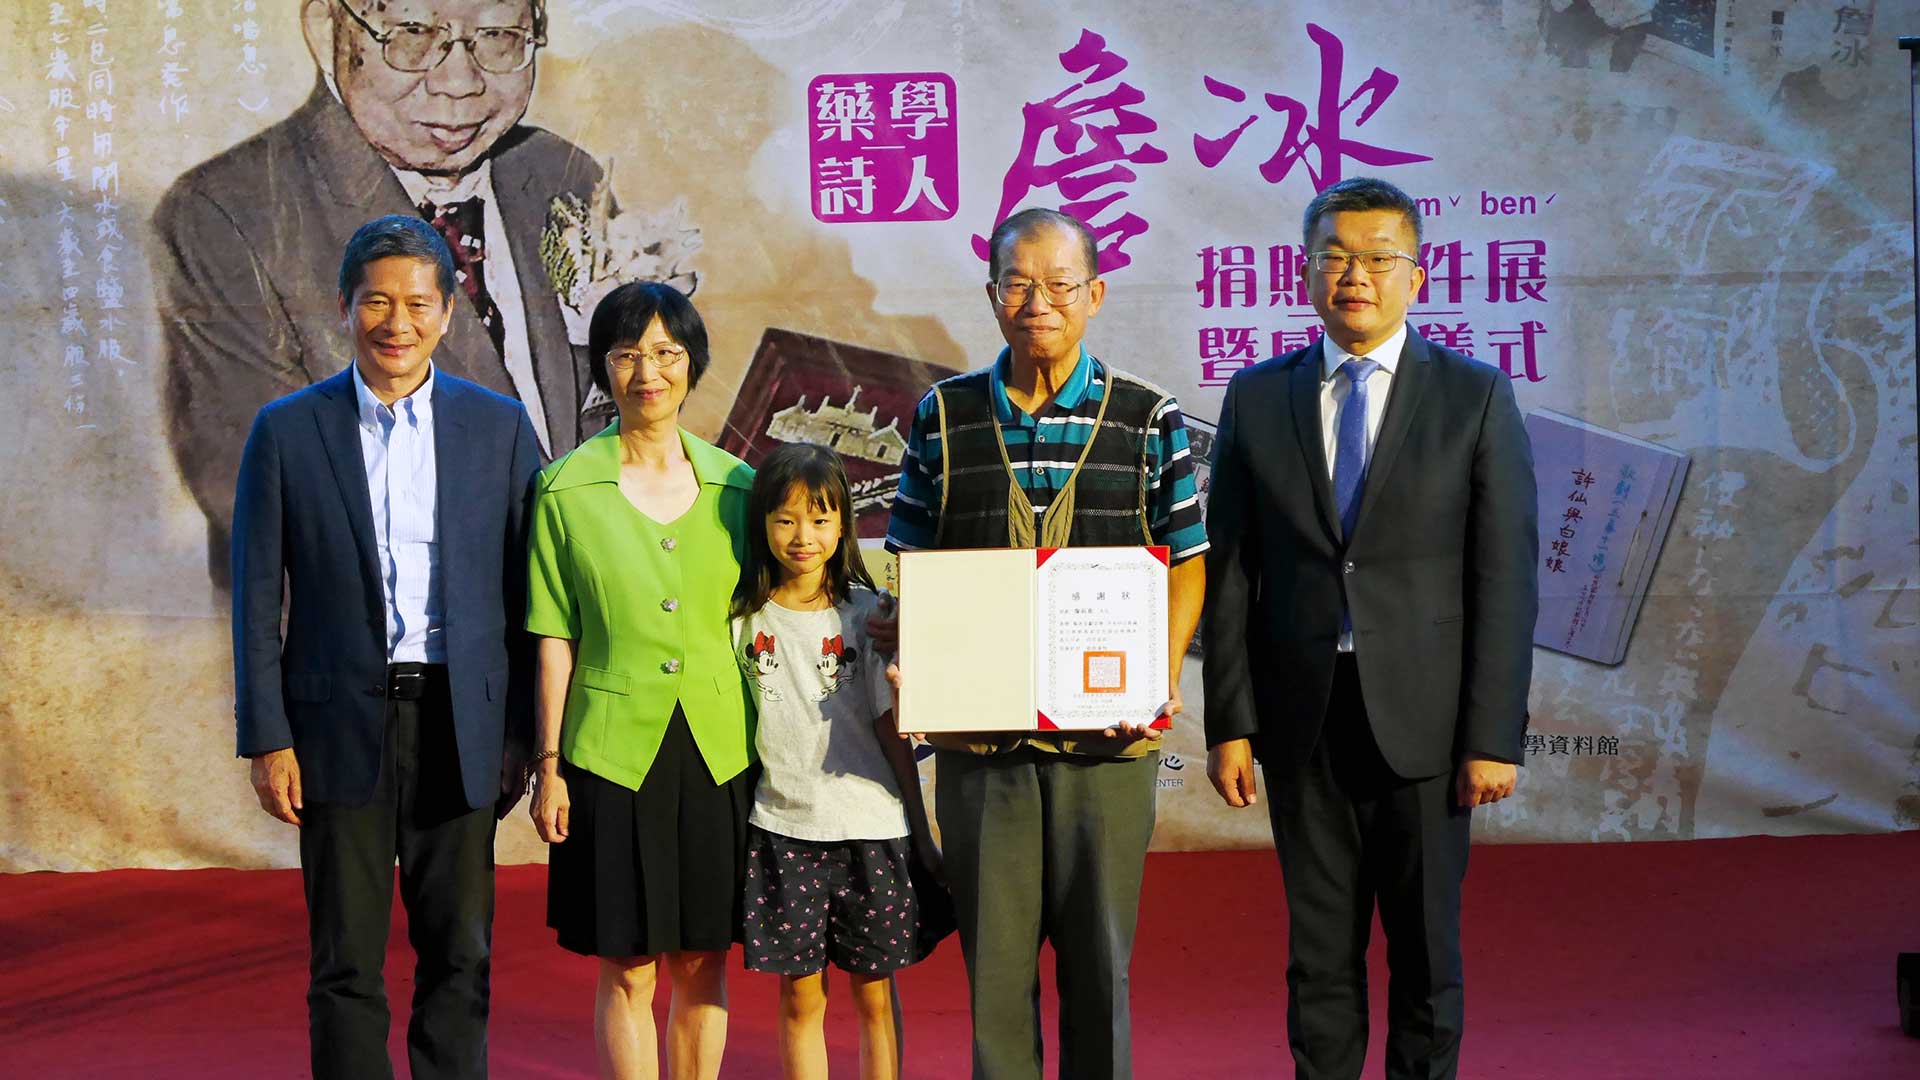 (Minister Li Yung Te presented the certification of appreciation to the family member of Zhan Bing --- Zhan Qian-Wei and his wife, and Vice President Tsai Chi-Chang)